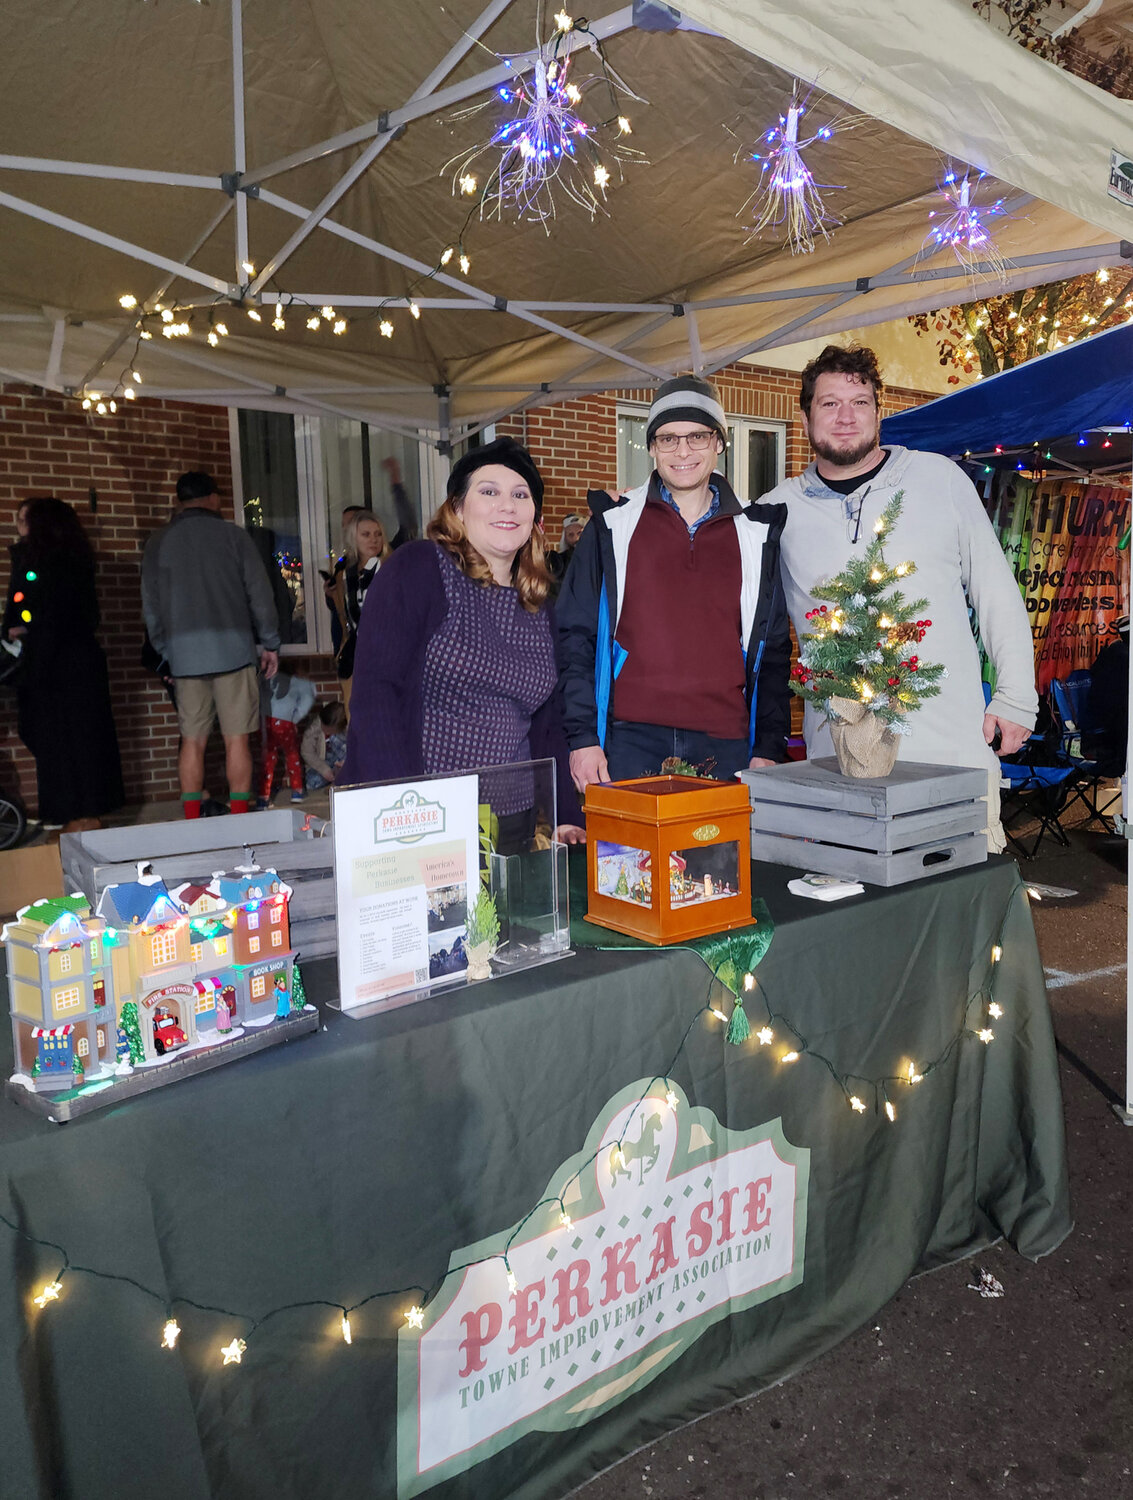 (From left) Michelle Cosgrove, Martin Franke and Corey Armideo man the Perkasie Town Improvement Association booth.